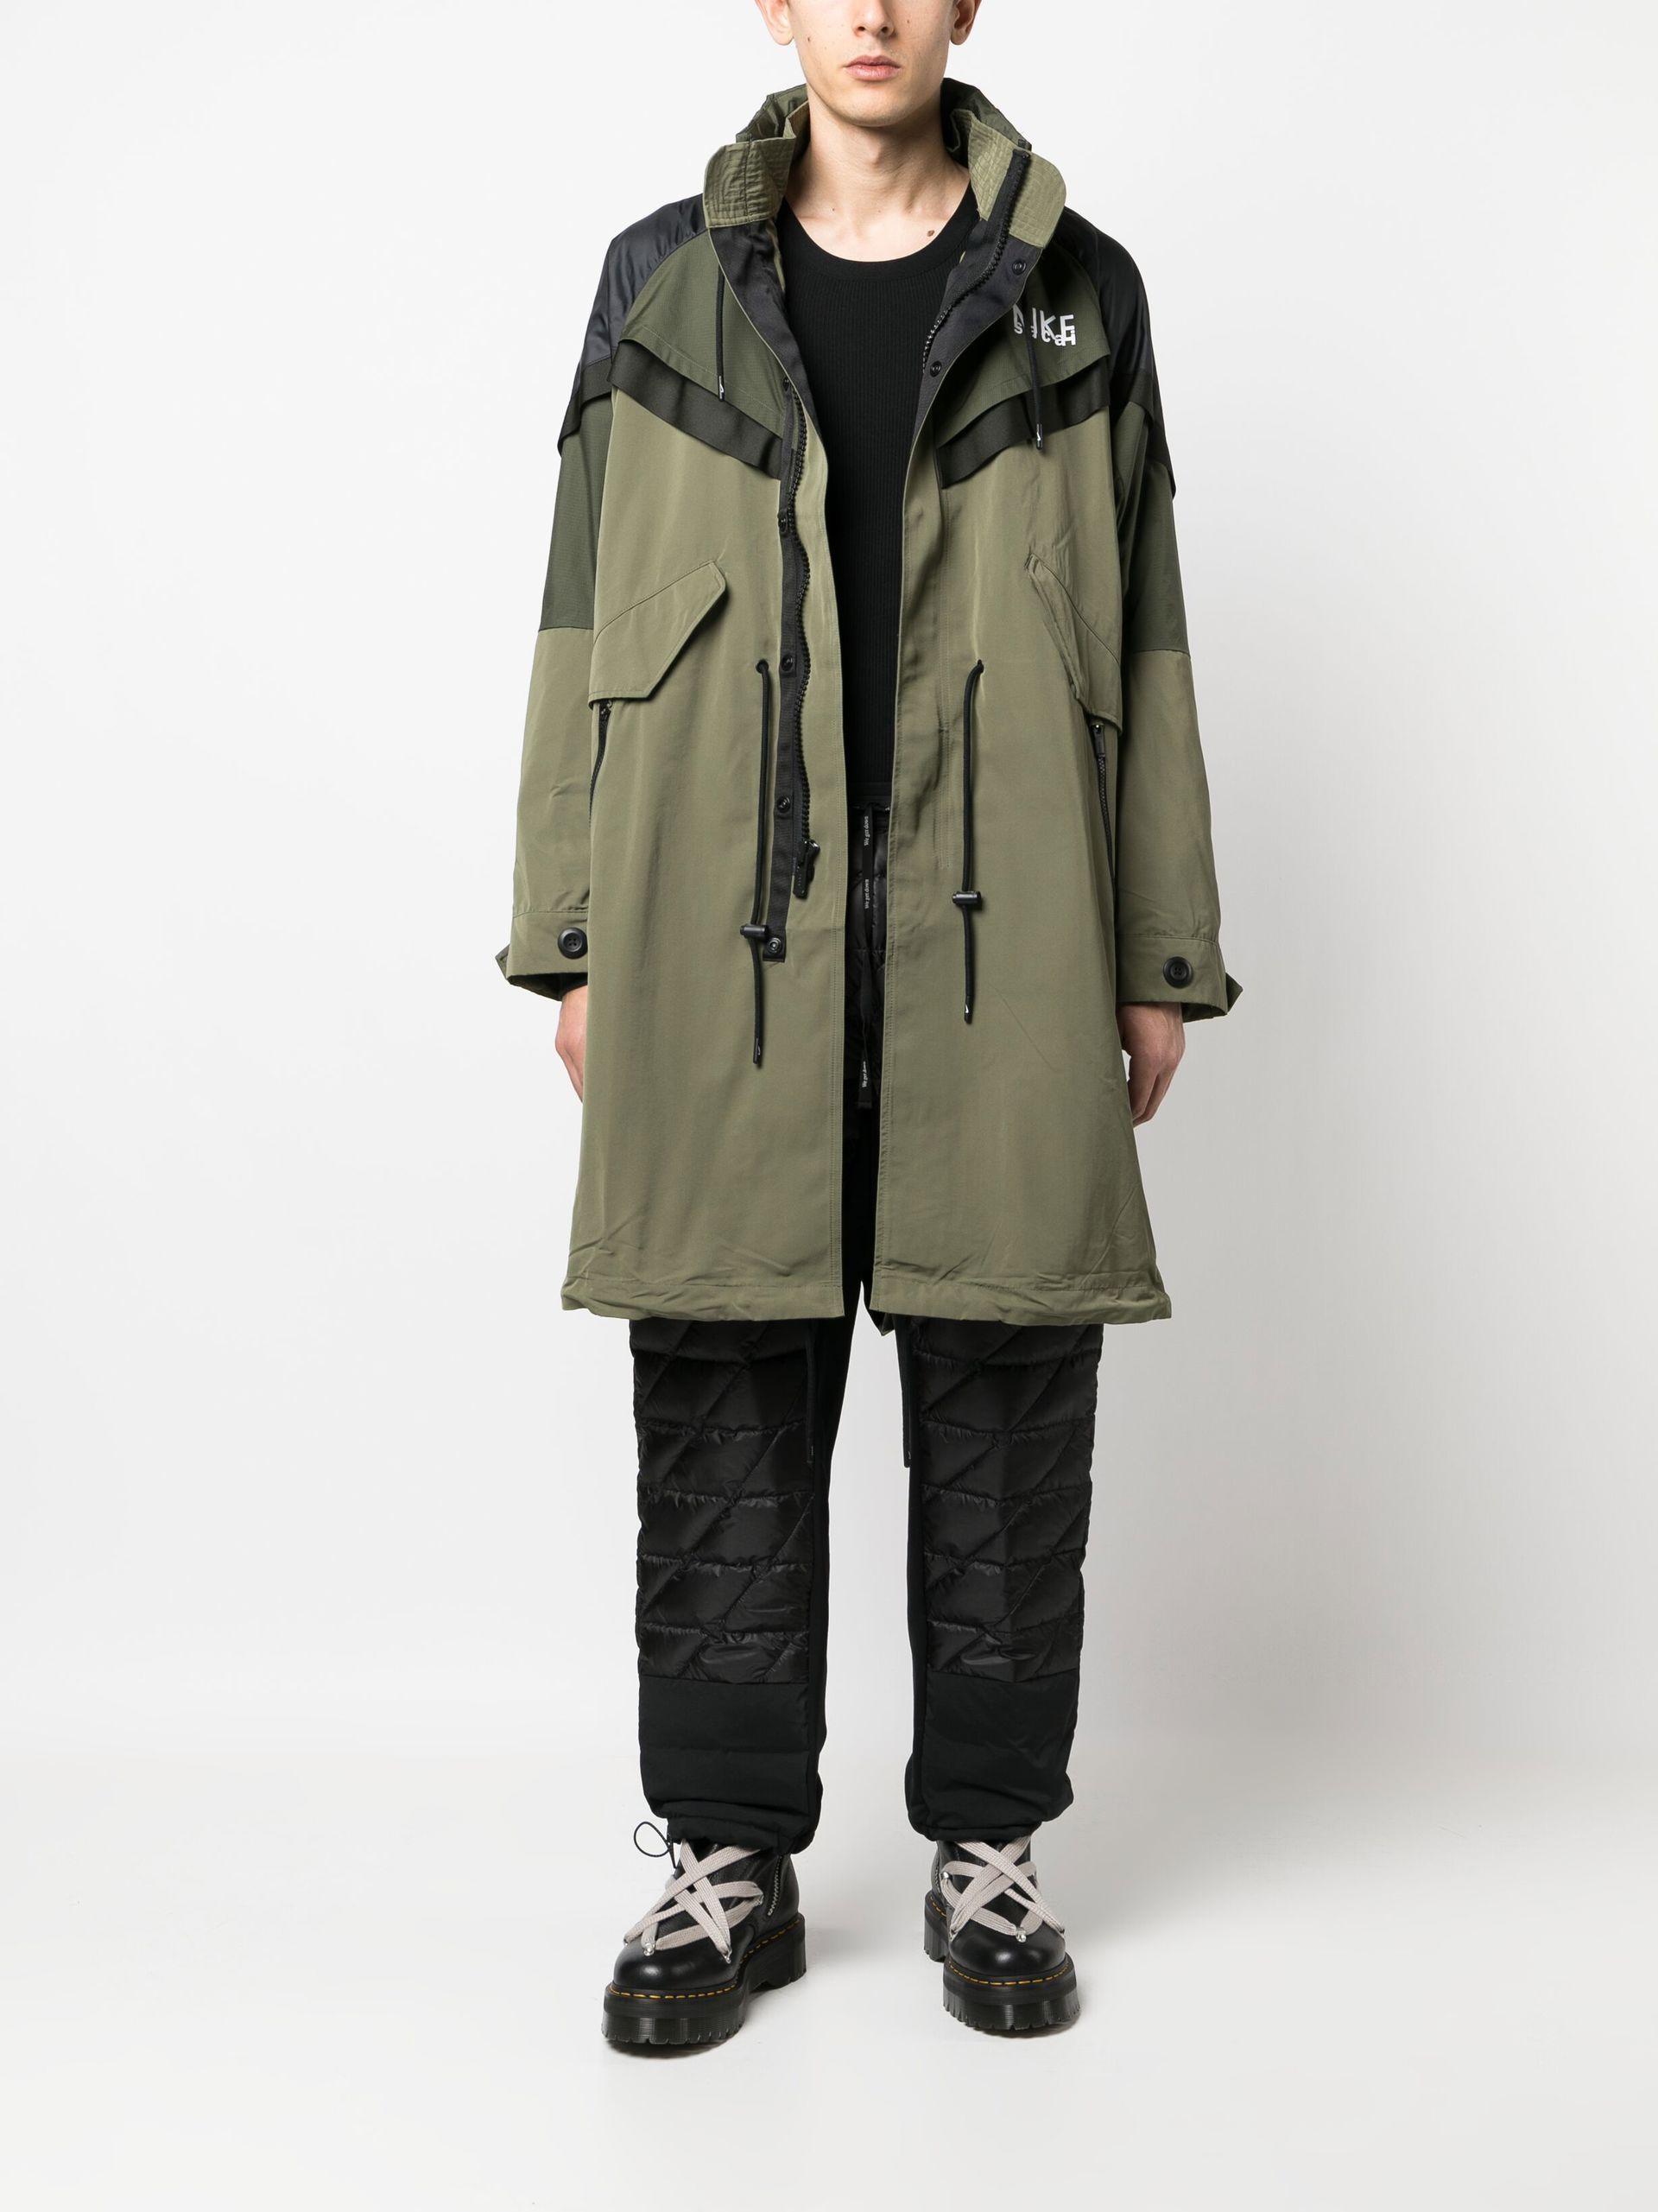 Nike X Sacai Hooded Parka Coat in Green for Men | Lyst